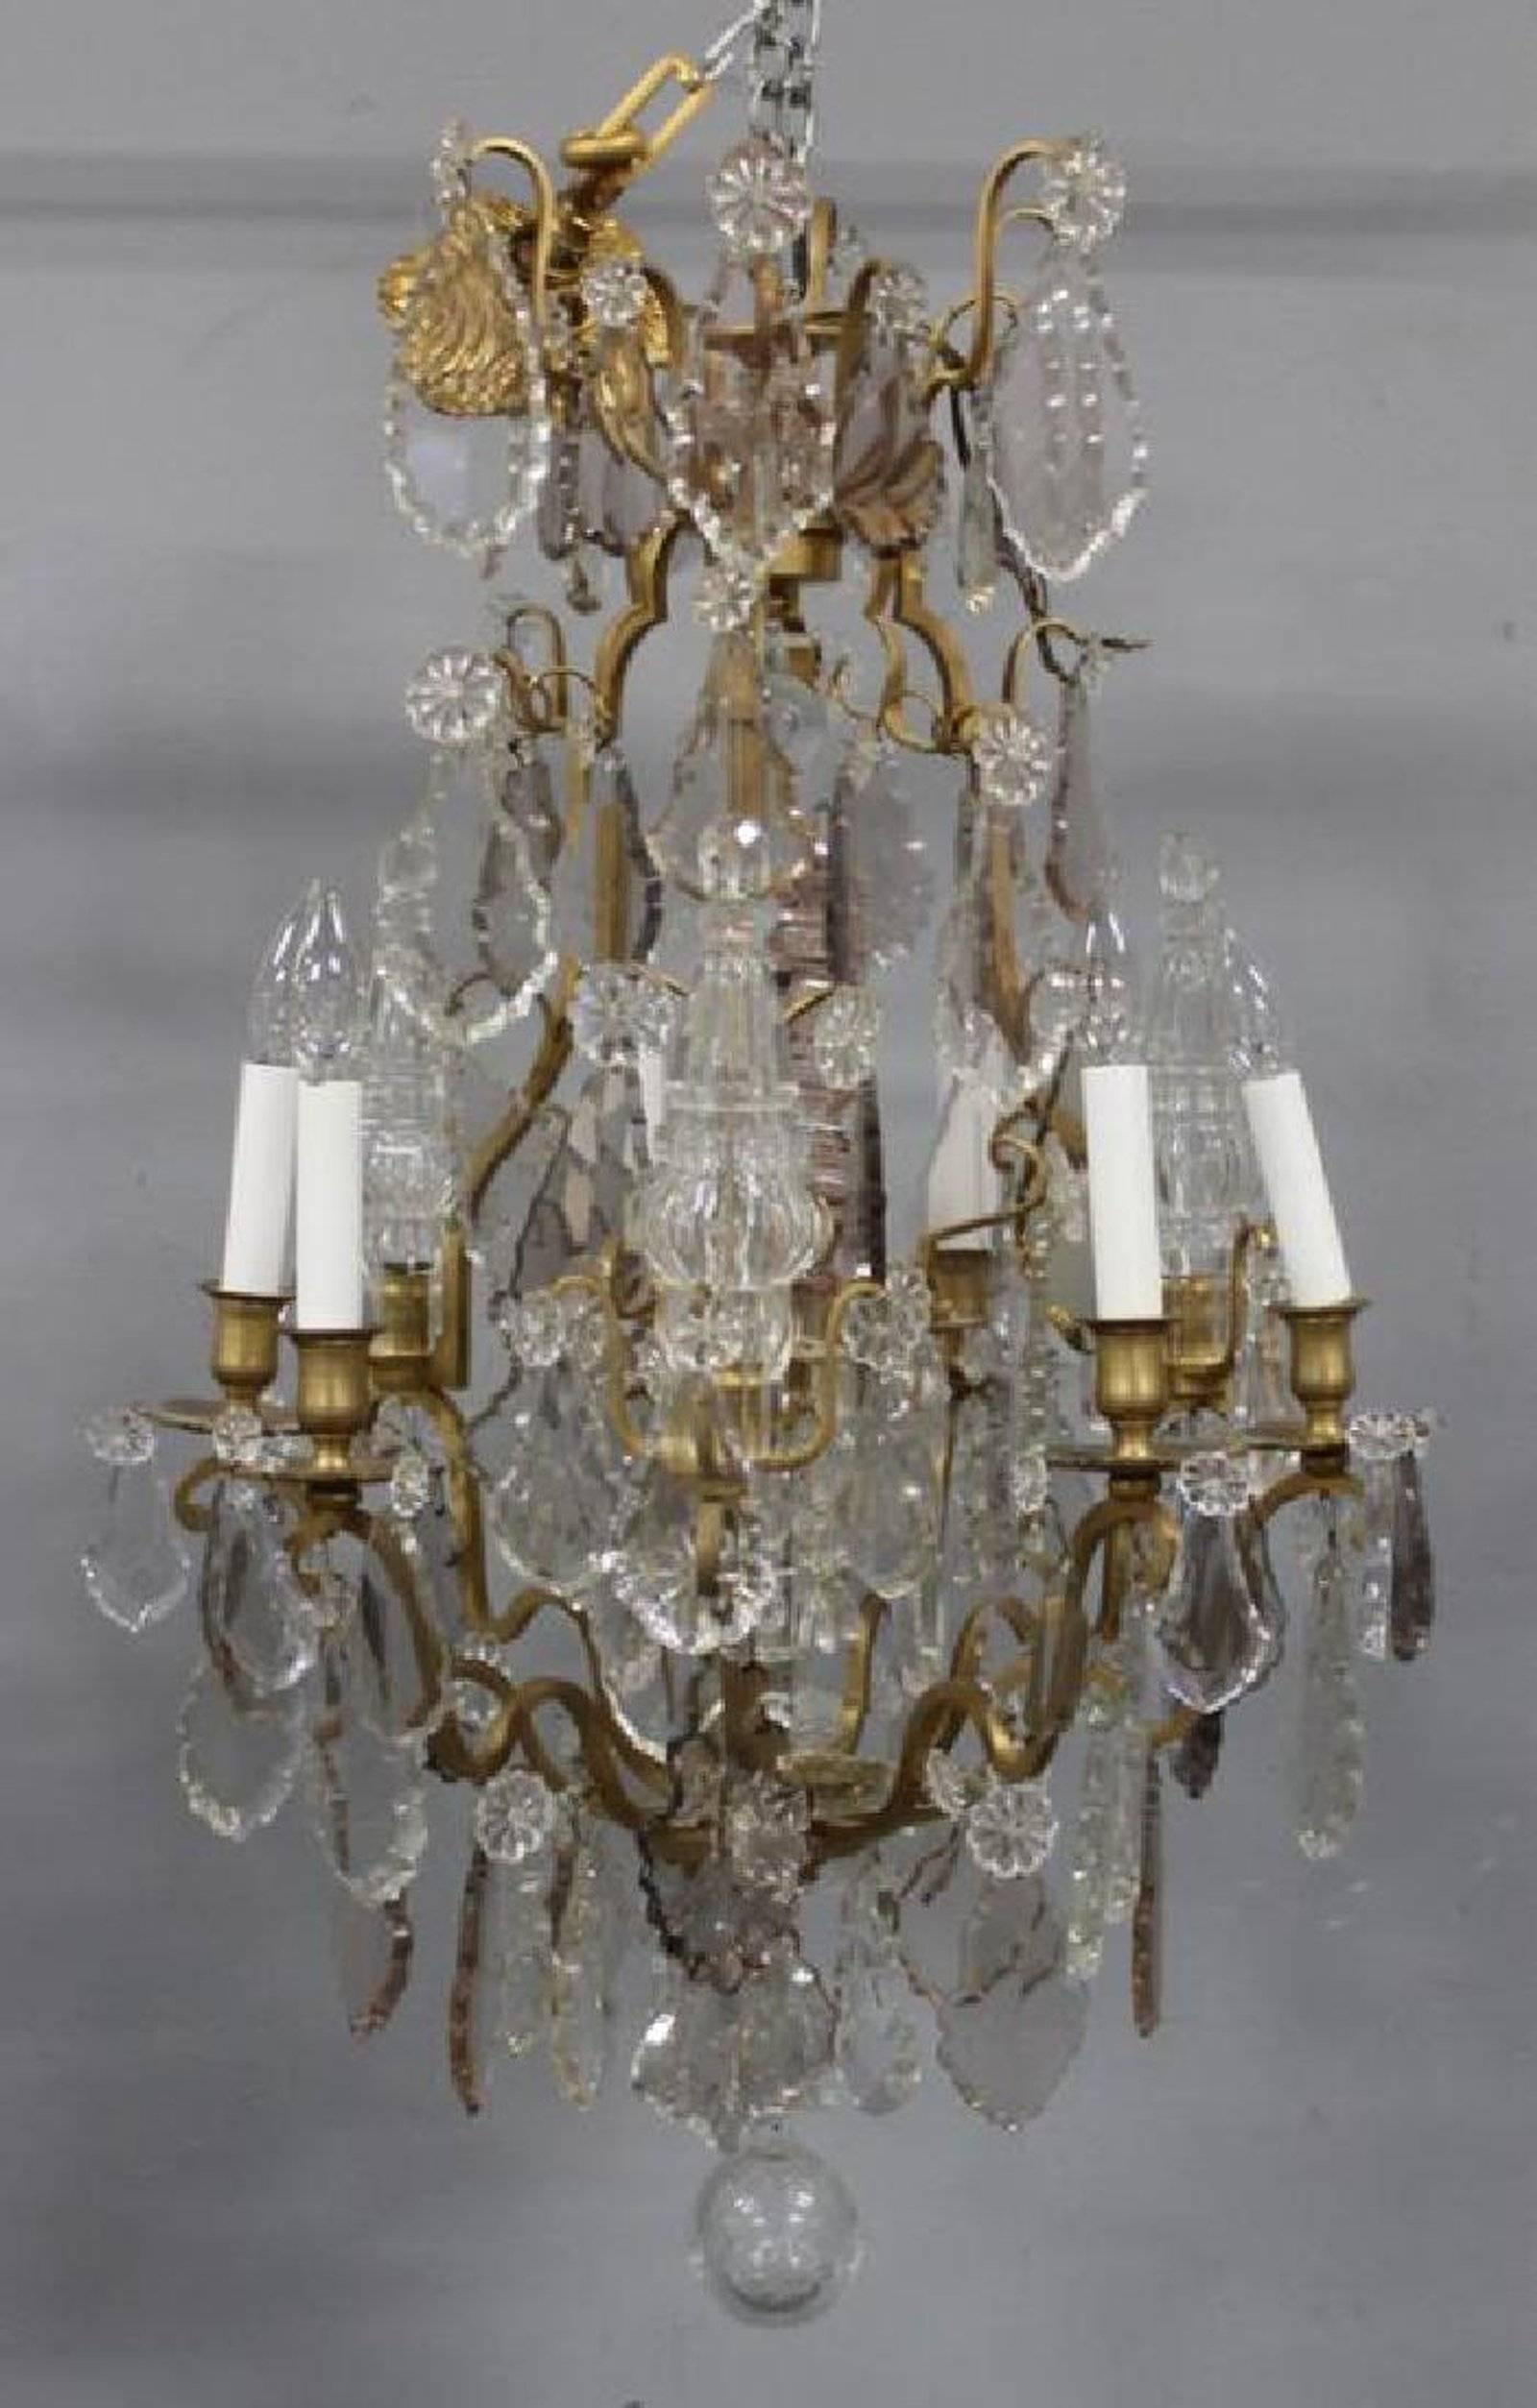 A beautiful and fine quality bronze and cut crystal chandelier with crystal spearpoints that light up, attributed to Baccarat.
This fixture was reportedly bought as Baccarat 30 years ago in Paris.